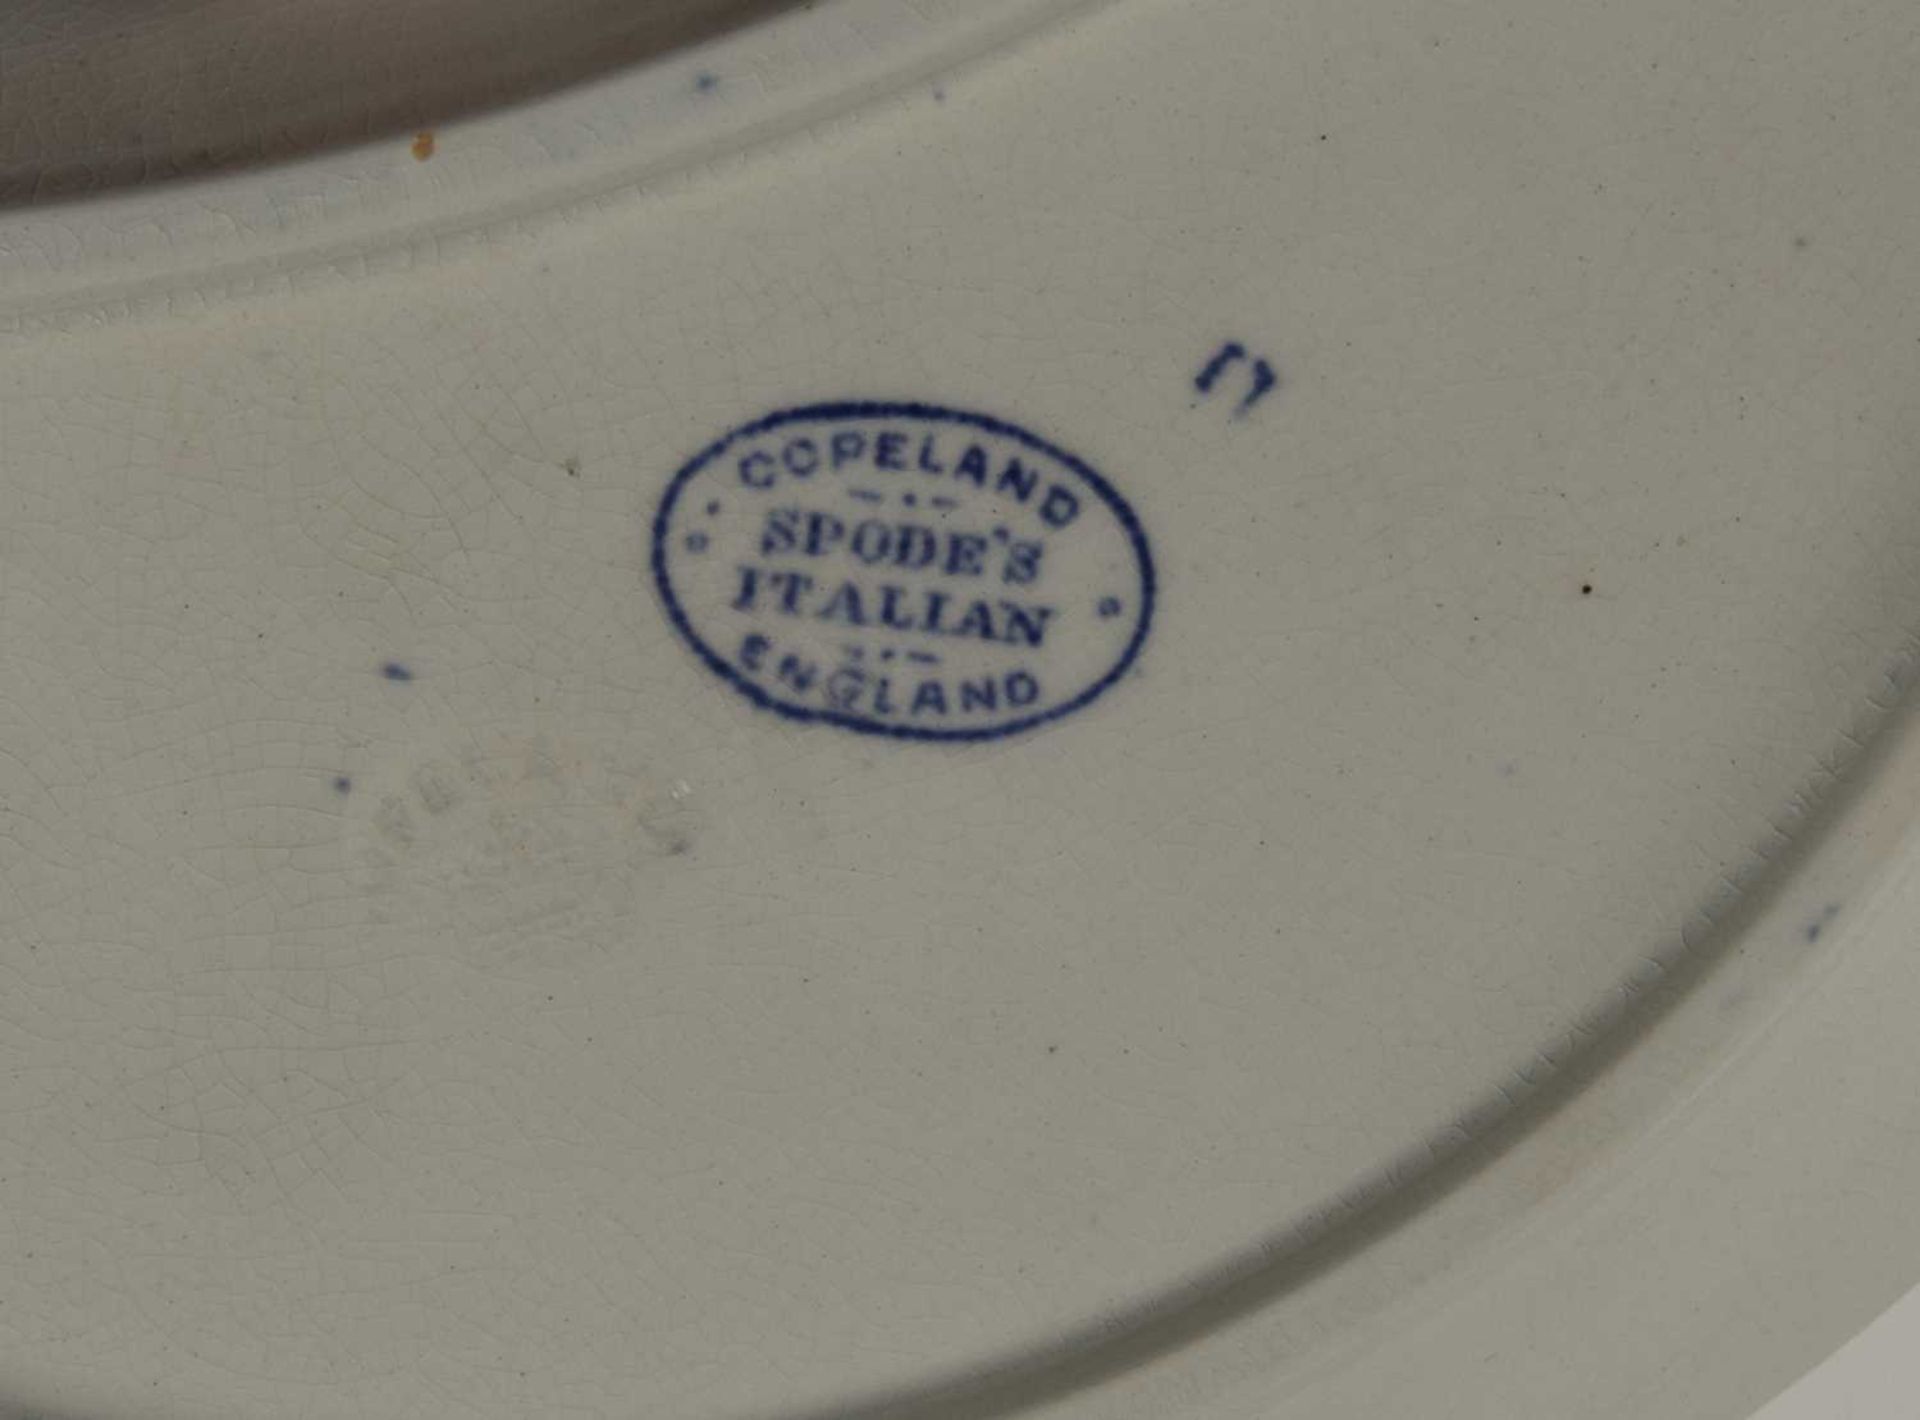 Copeland Spode Italian blue and white part dinner service including: plates, serving dishes, teacups - Image 3 of 6